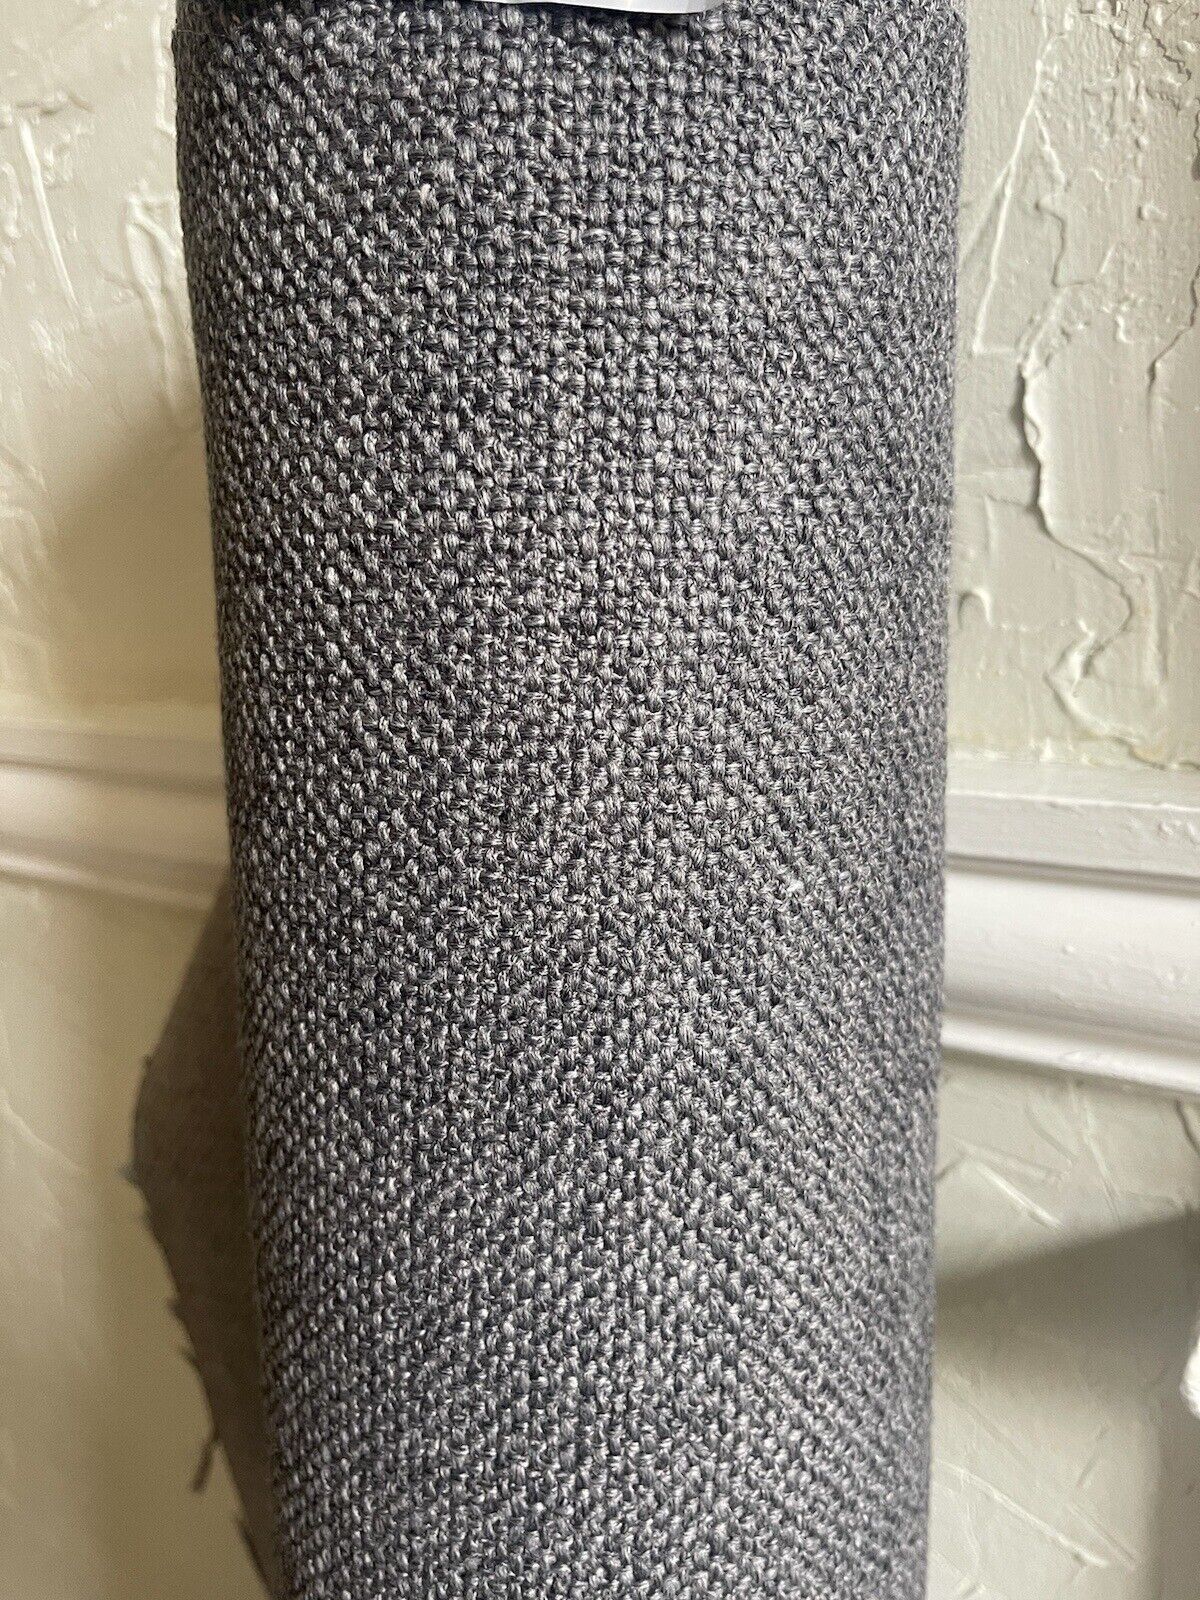 KRAVET Couture GREY TEXTURED TWEED UPHOLSTERY FABRIC